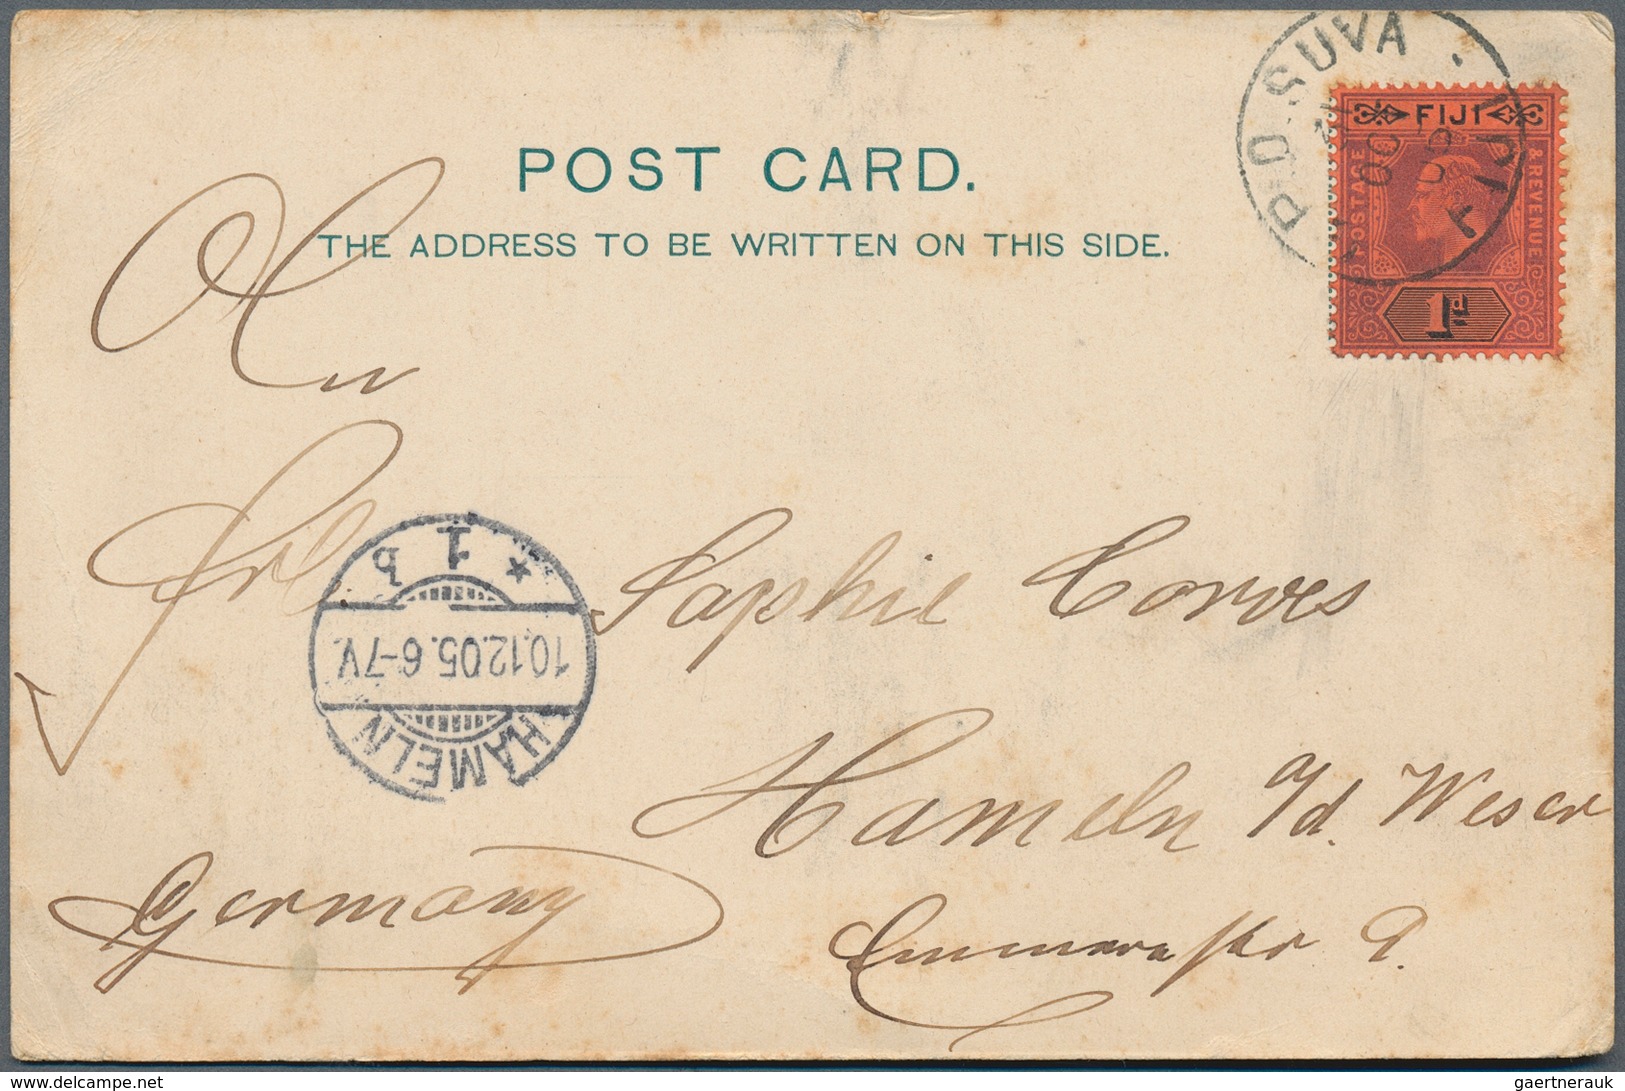 Fiji-Inseln: 1890/1955 (ca.), cards (7), inbound (3) 1912 from Switzerland and UK, airmails KGVI/QEI